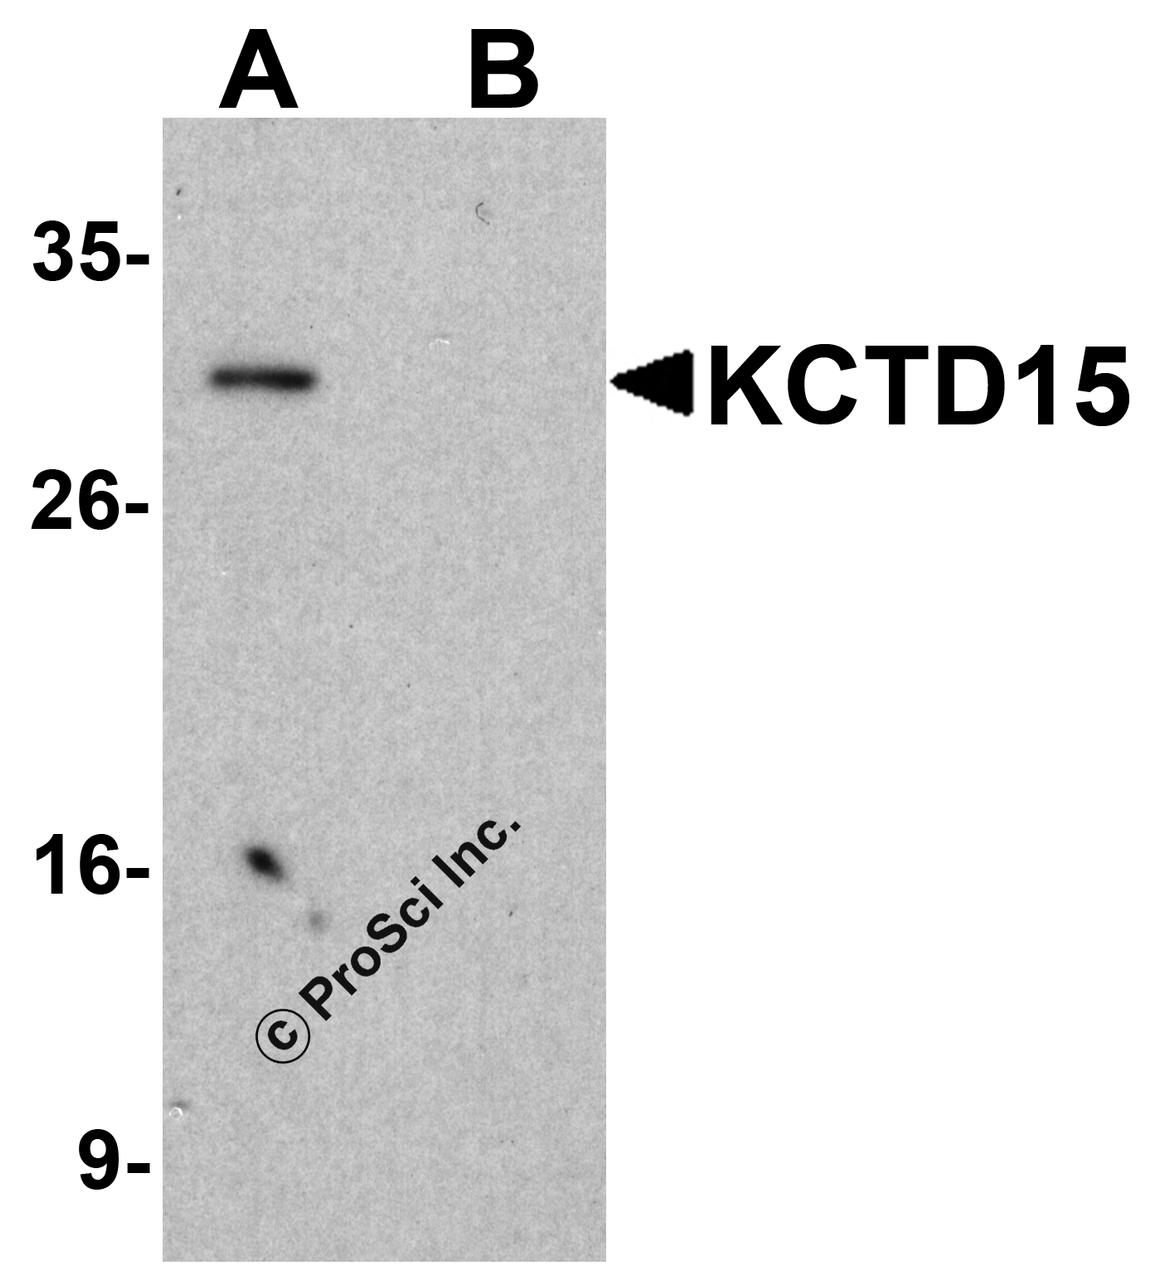 Western blot analysis of KCTD15 in HeLa cell lysate with KCTD15 antibody at 1&#956;g/ml in (A) the absence and (B) the presence of blocking buffer.